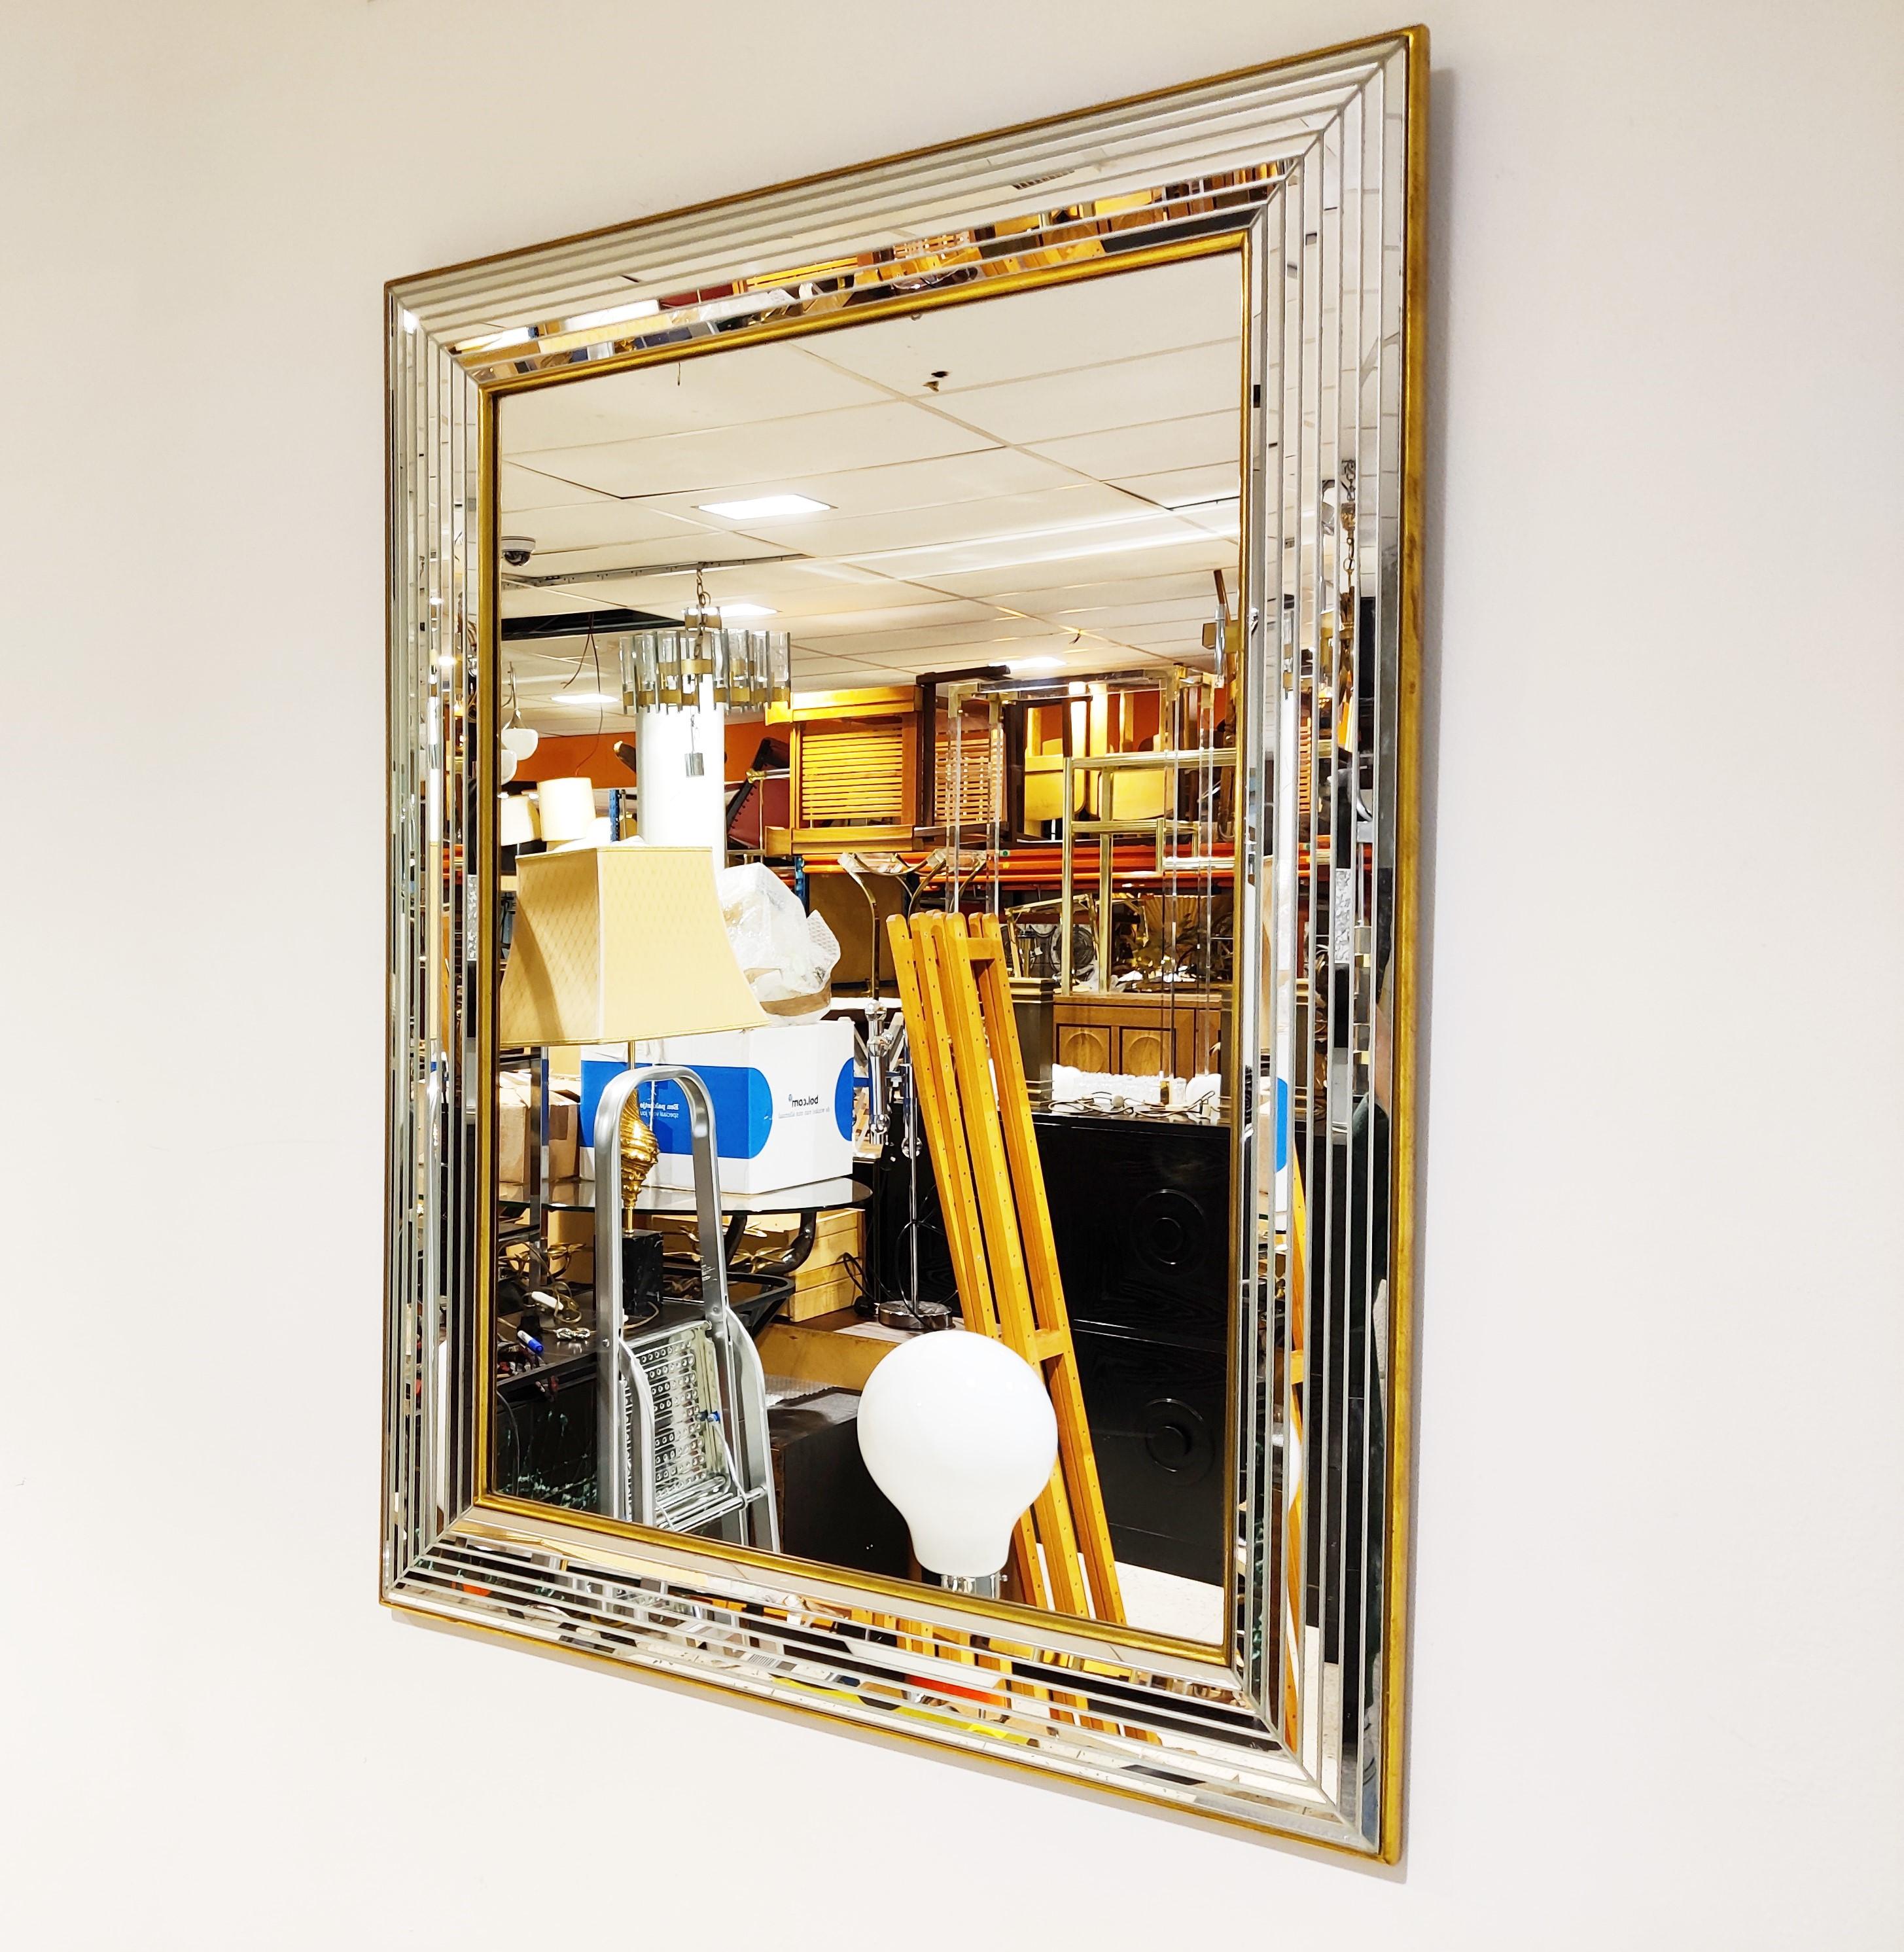 Seventies wall mirror made in Belgium.

Beautiful multi layer mirror glass edge with gilded finish.

This mirror was made by Deknudt.

1970s - Belgium

Dimensions:

Height: 85cm/33.46